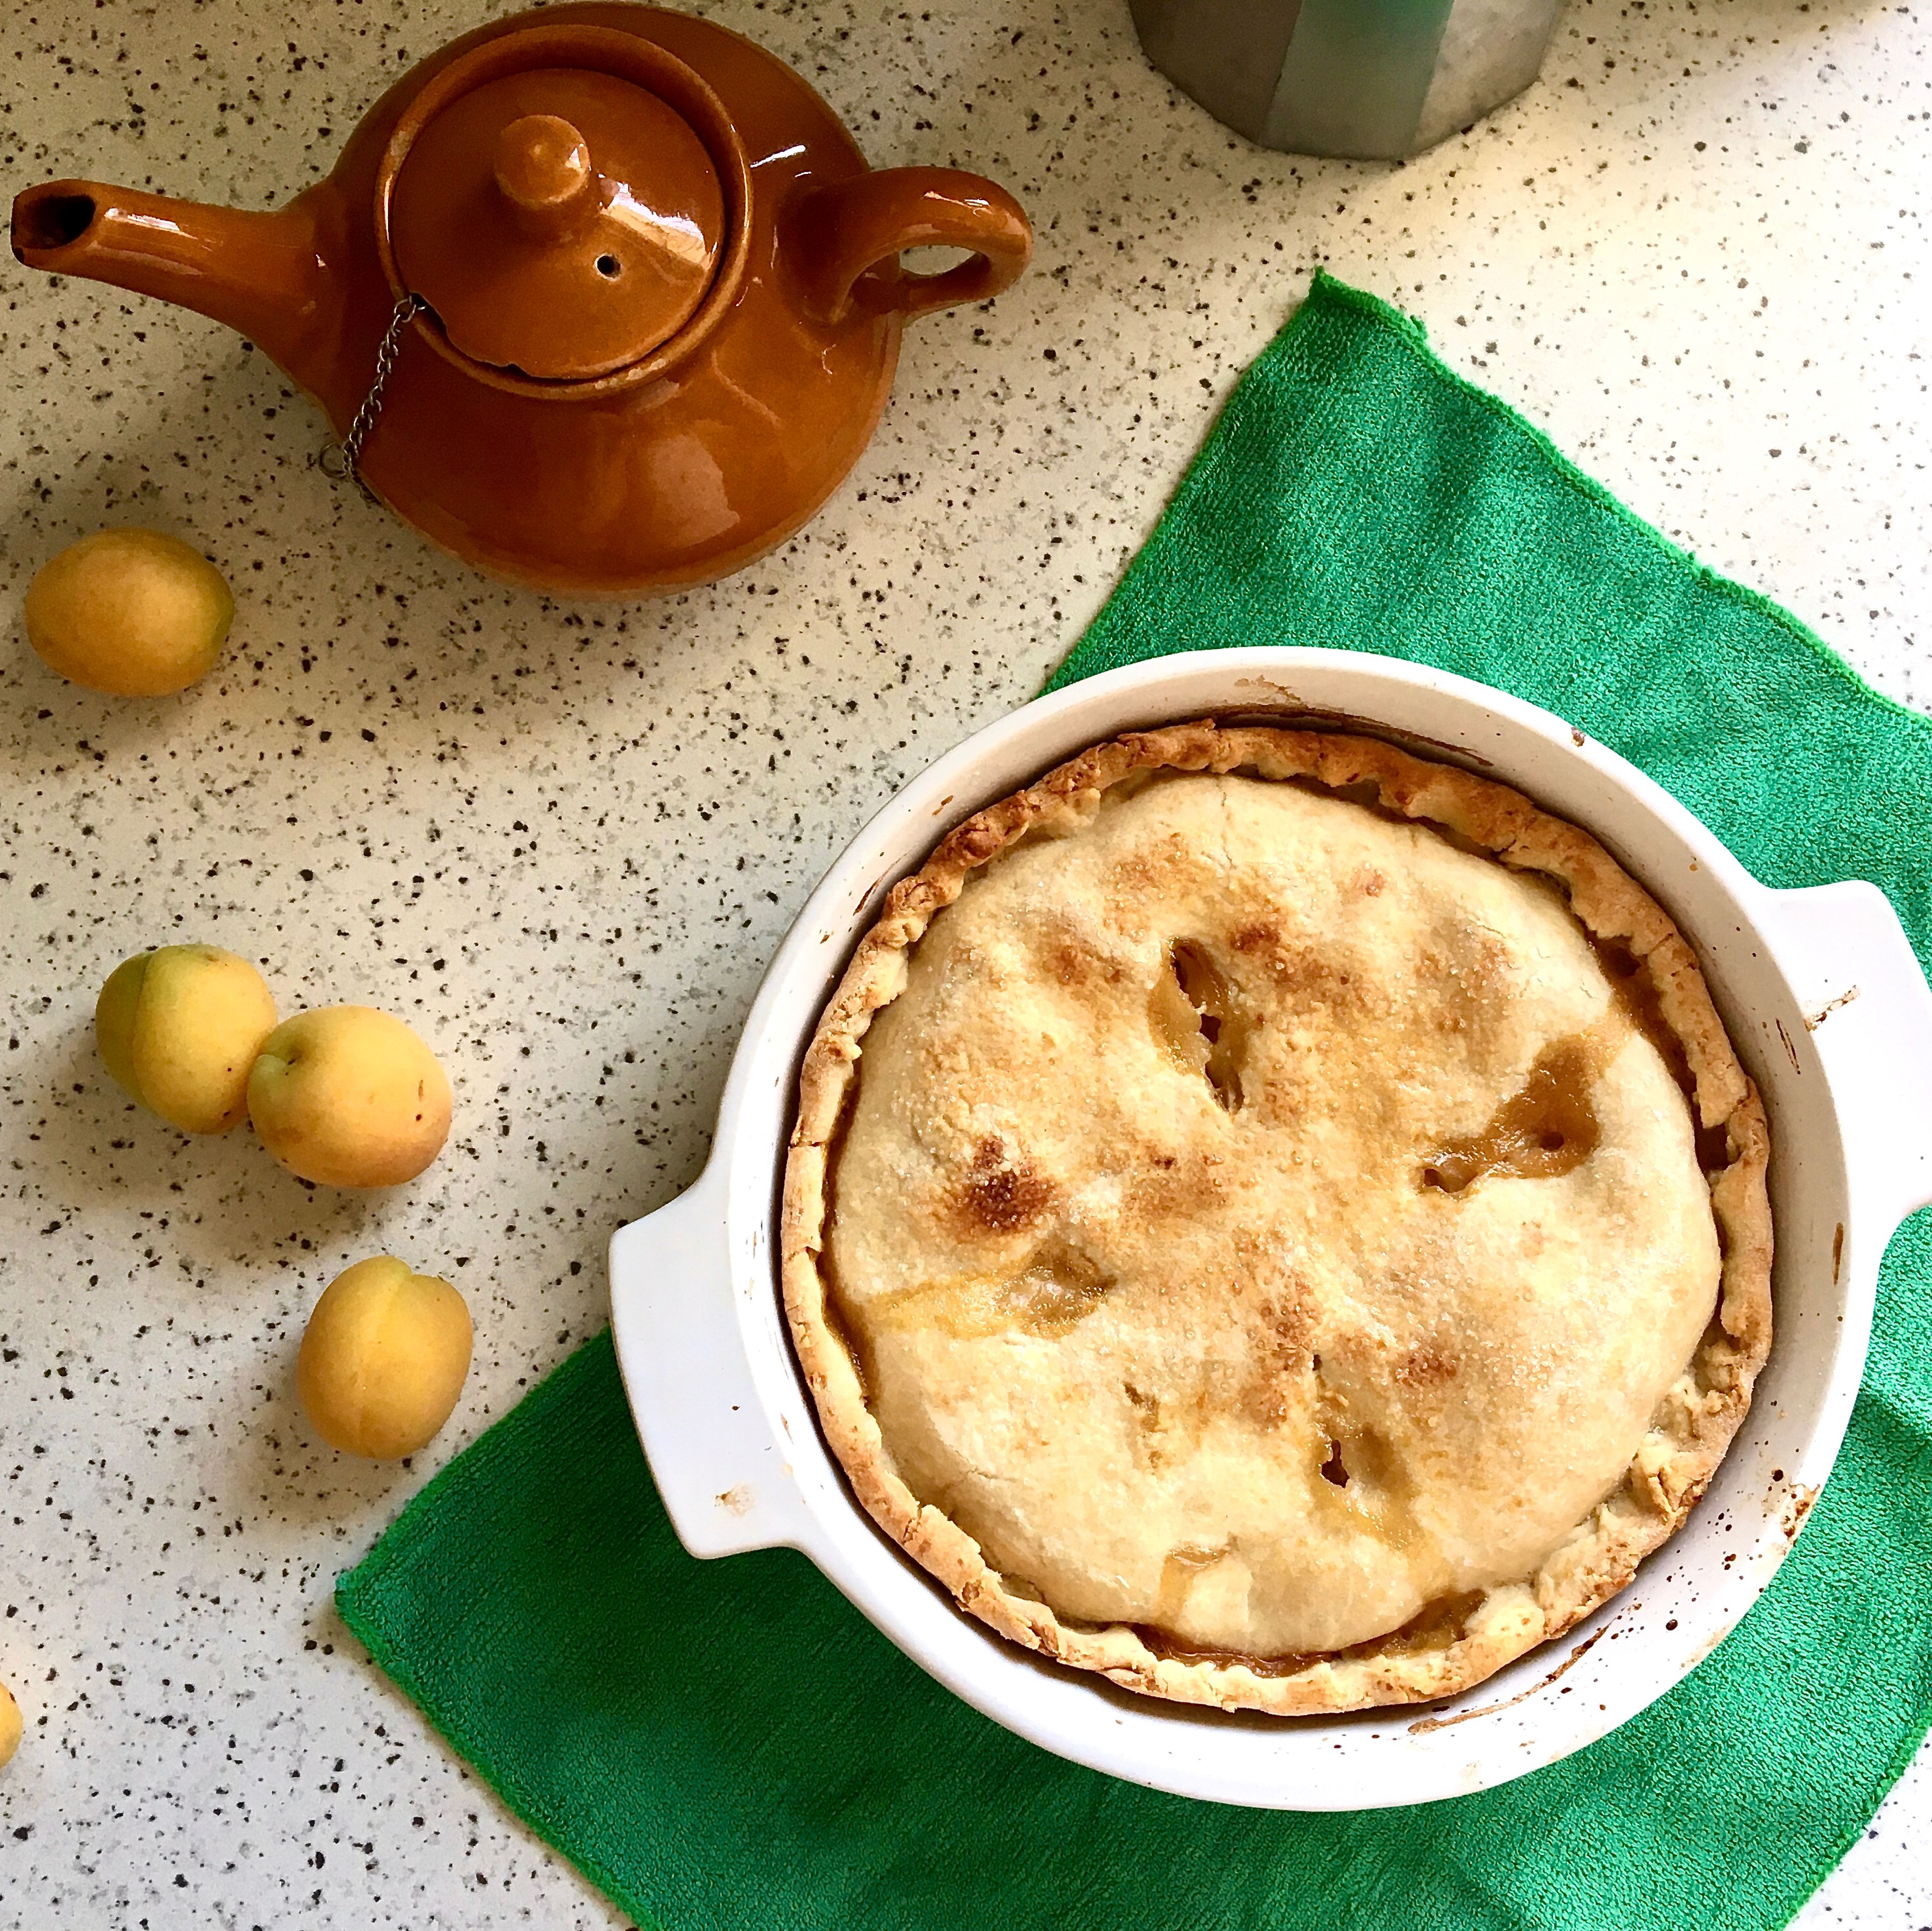 Using a pastry brush, brush the reserved apricot juice from the pan onto the pie. Cut some scores over the top and sprinkle with sugar. Bake at 180 C for 30-35 min. until the top is golden. Serve still warm with a cup of tea or a shot of espresso!